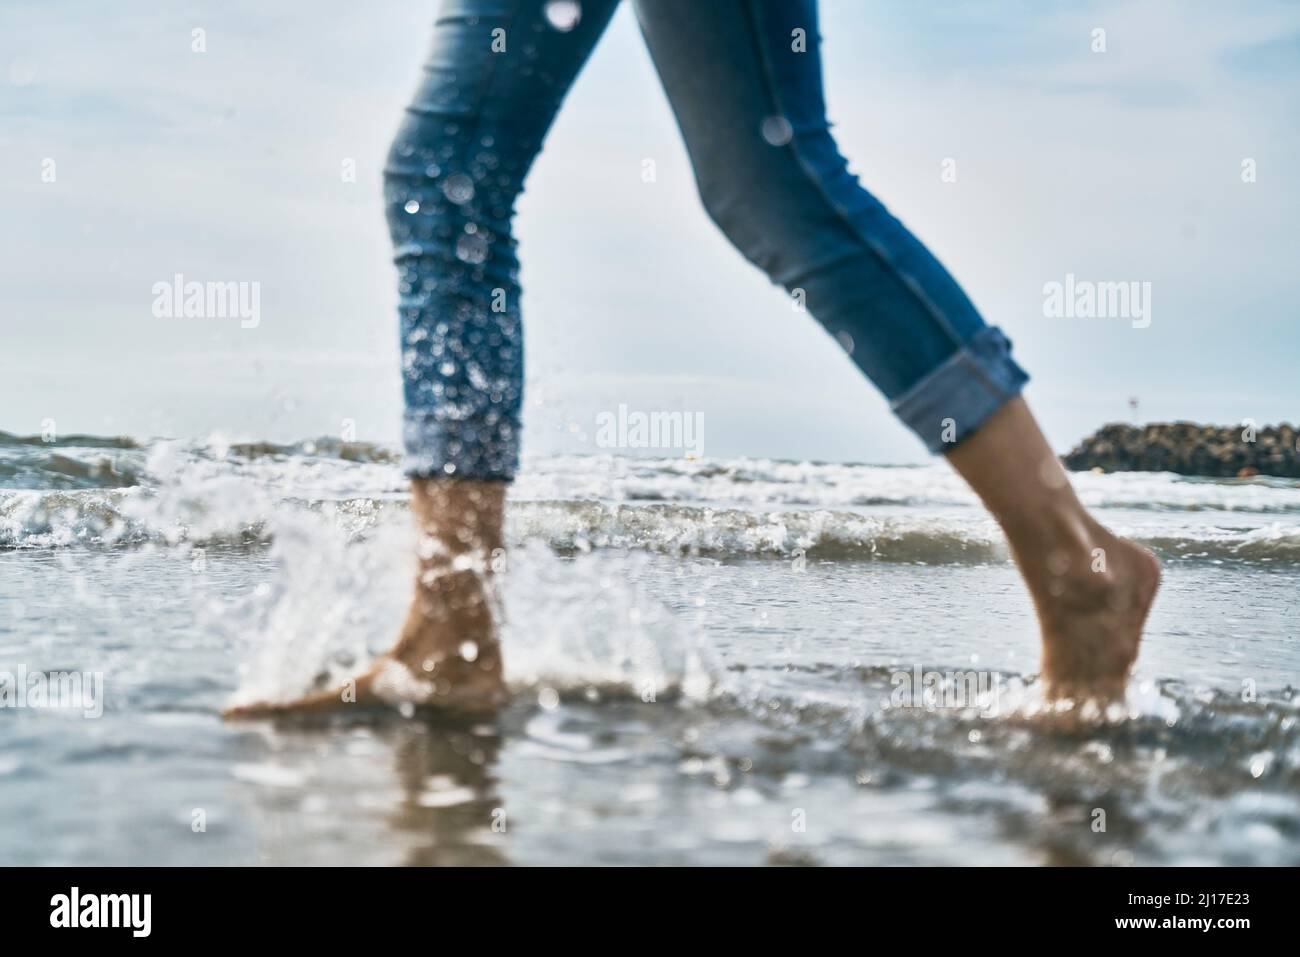 Woman running in water at beach Stock Photo